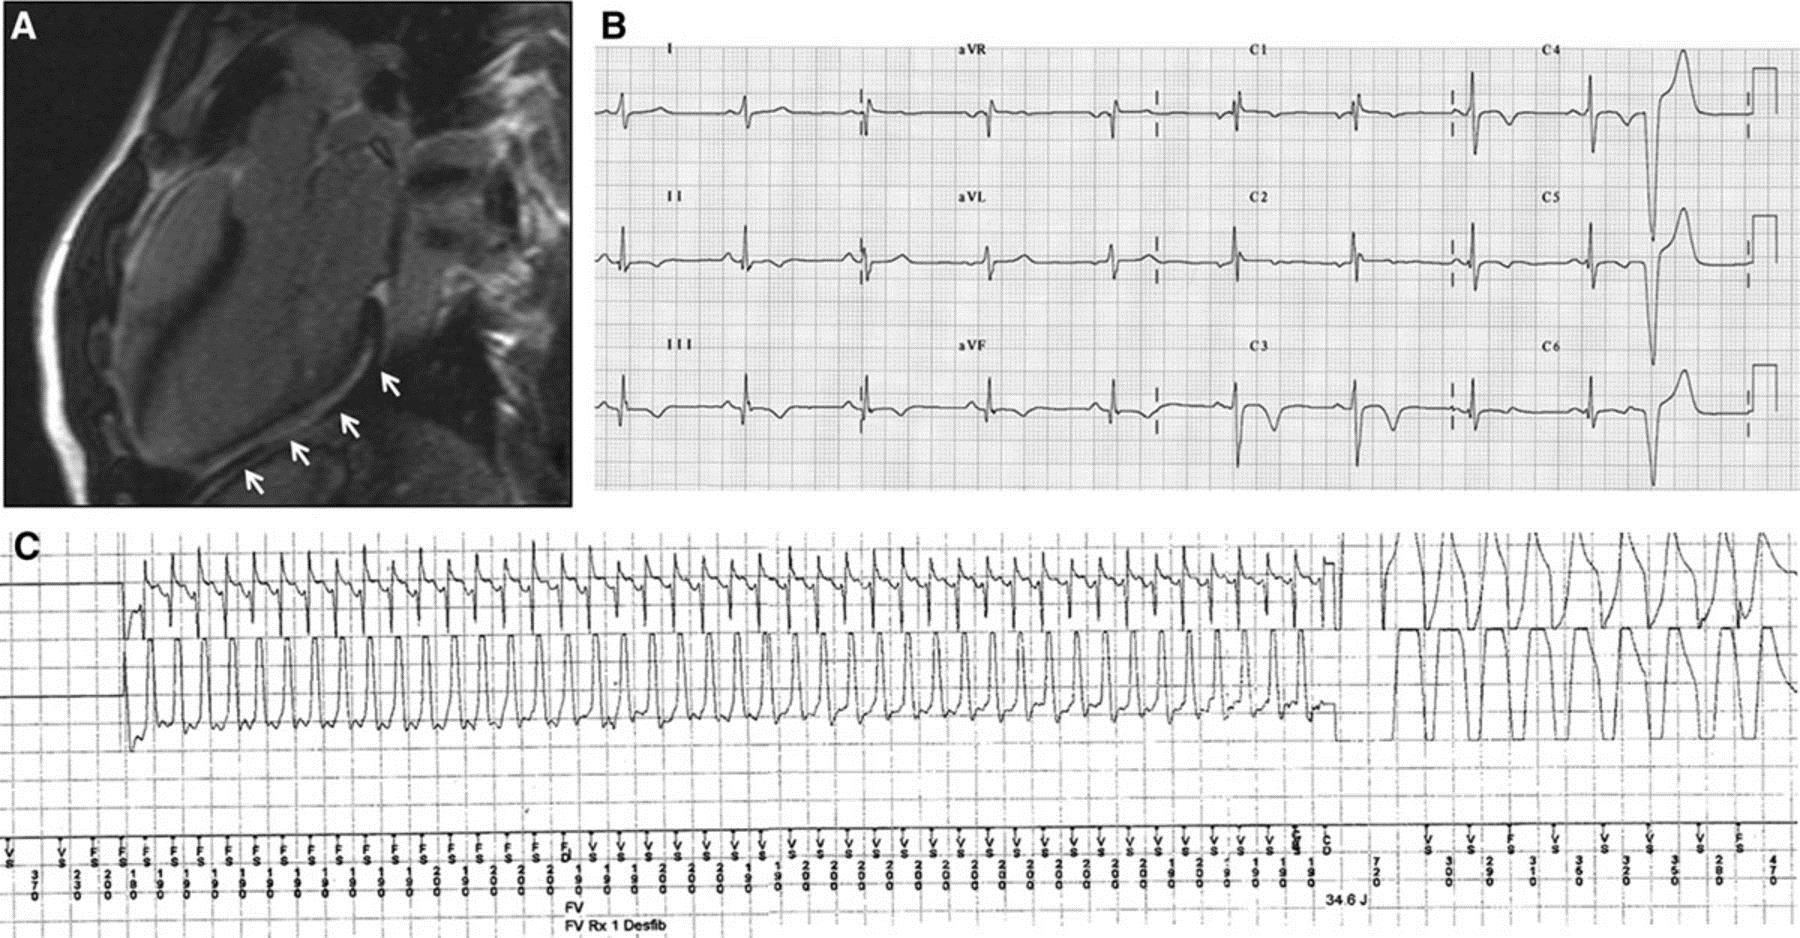 A 23-y-old soccer player who suffered syncope during a